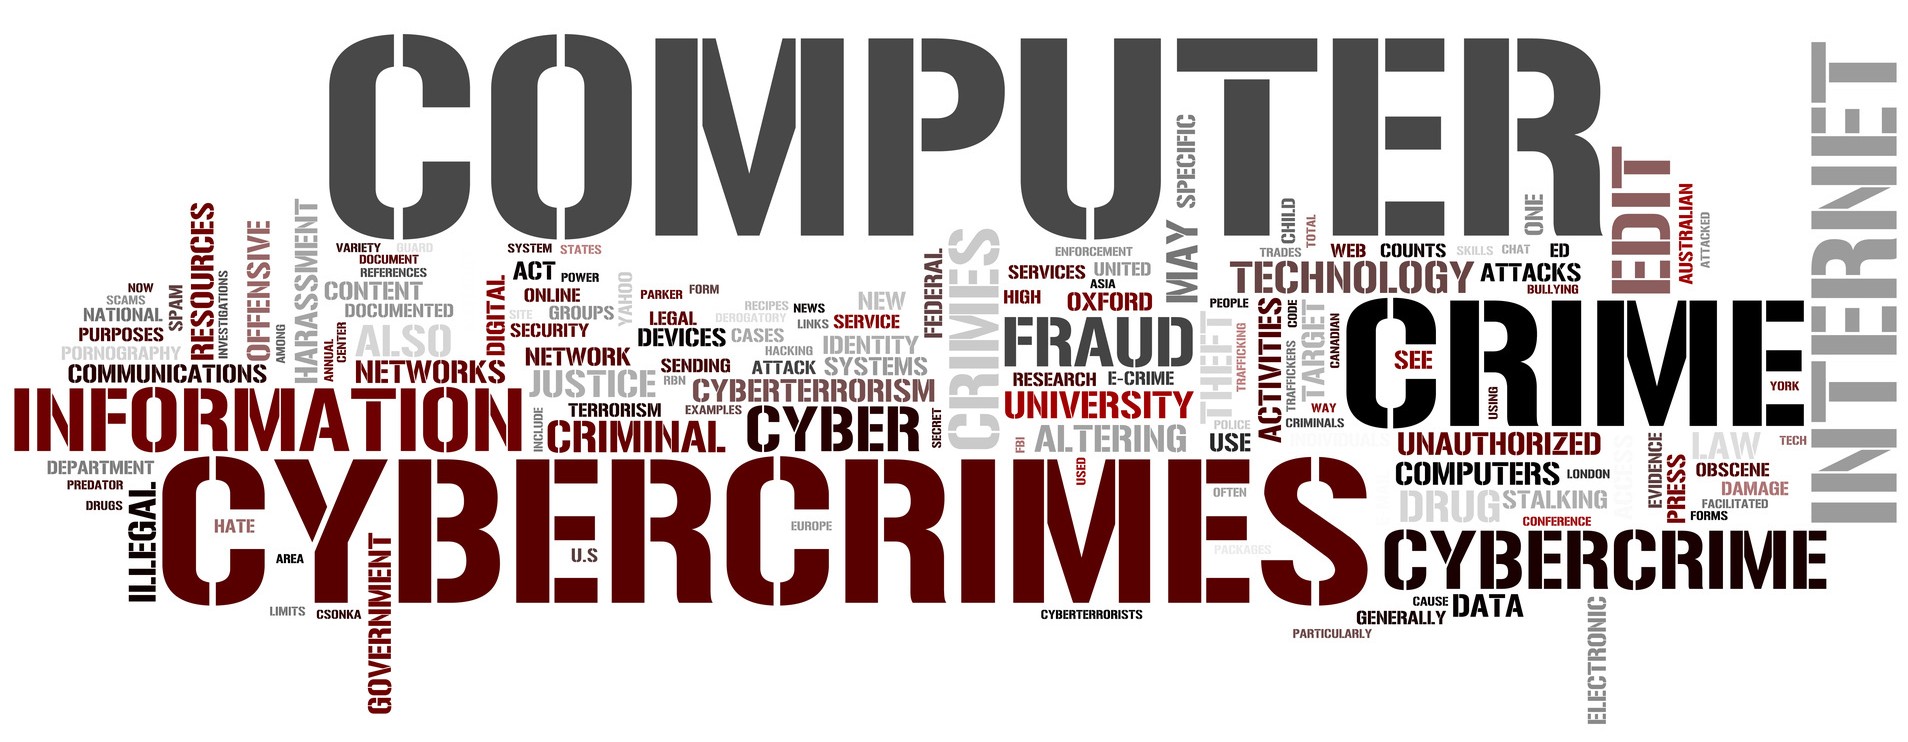 Example of essay about cyber crime law